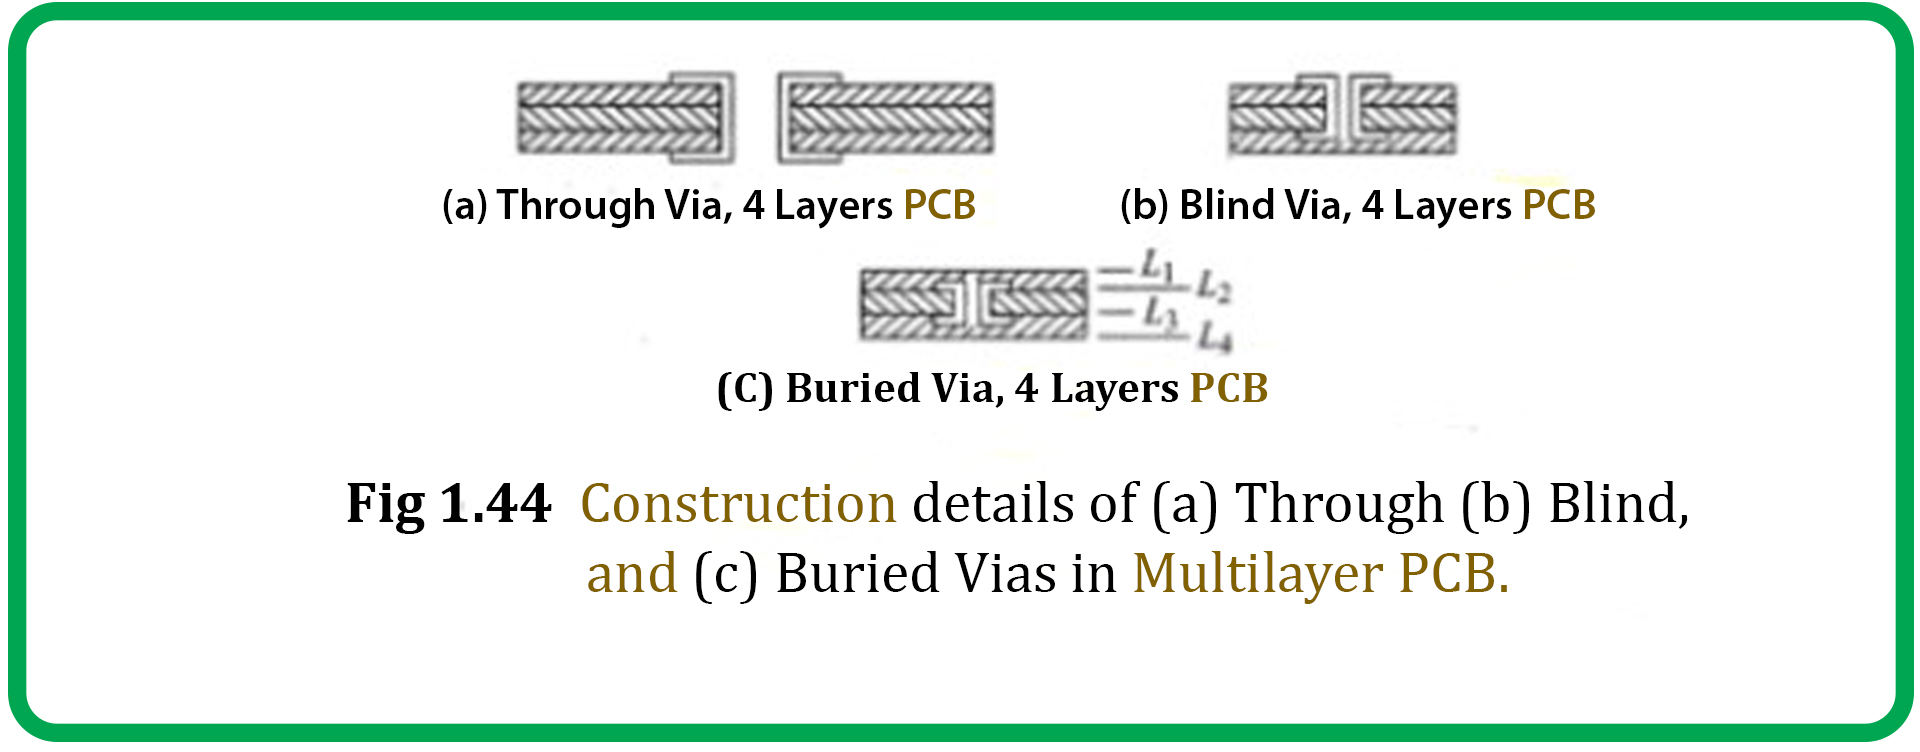 Introduction to Multi-layer PCBs, Criteria for classification of multi-layer PCBs, Overview of Multi-layer PCB, Construction of Multi-layer PCB, Problem faced by experts in developing multi-layer PCBs, What is prepreg, Lamination method of Multi-layer PCB, Why do we need multi-layer PCB, Common mistakes the in developing process of multi-layer PCBs, Advantages of multi-layer PCBs, Disadvantages of multi-layer PCBs, Applications of multi-layer PCBs